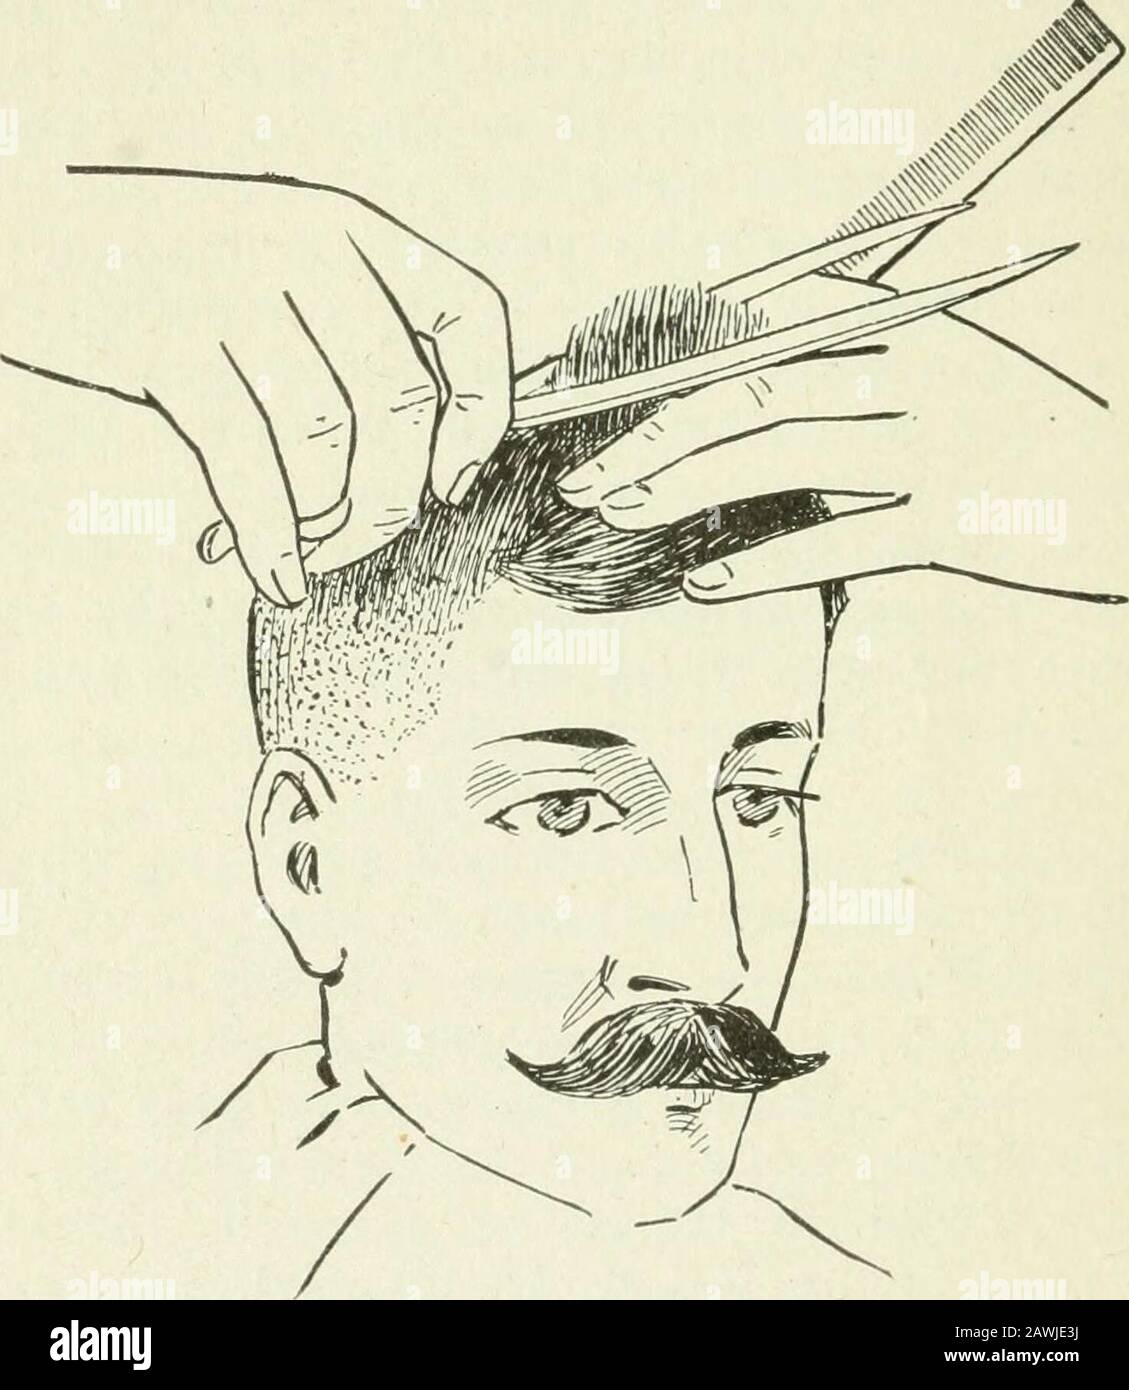 The manual on barbering, hairdressing, manicuring, facial massage ...